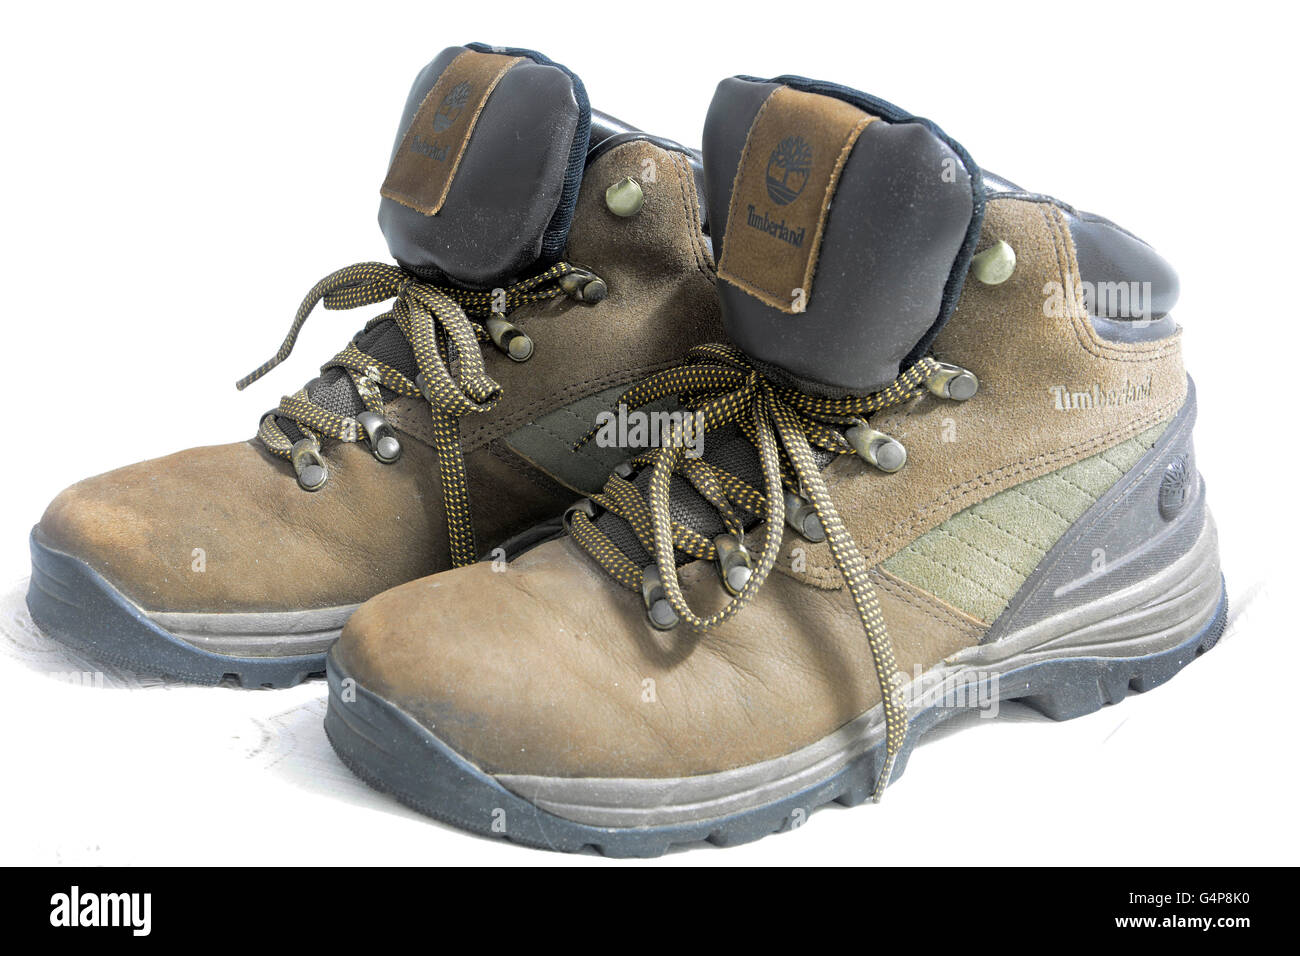 Safari Shoes High Resolution Stock Photography and Images - Alamy